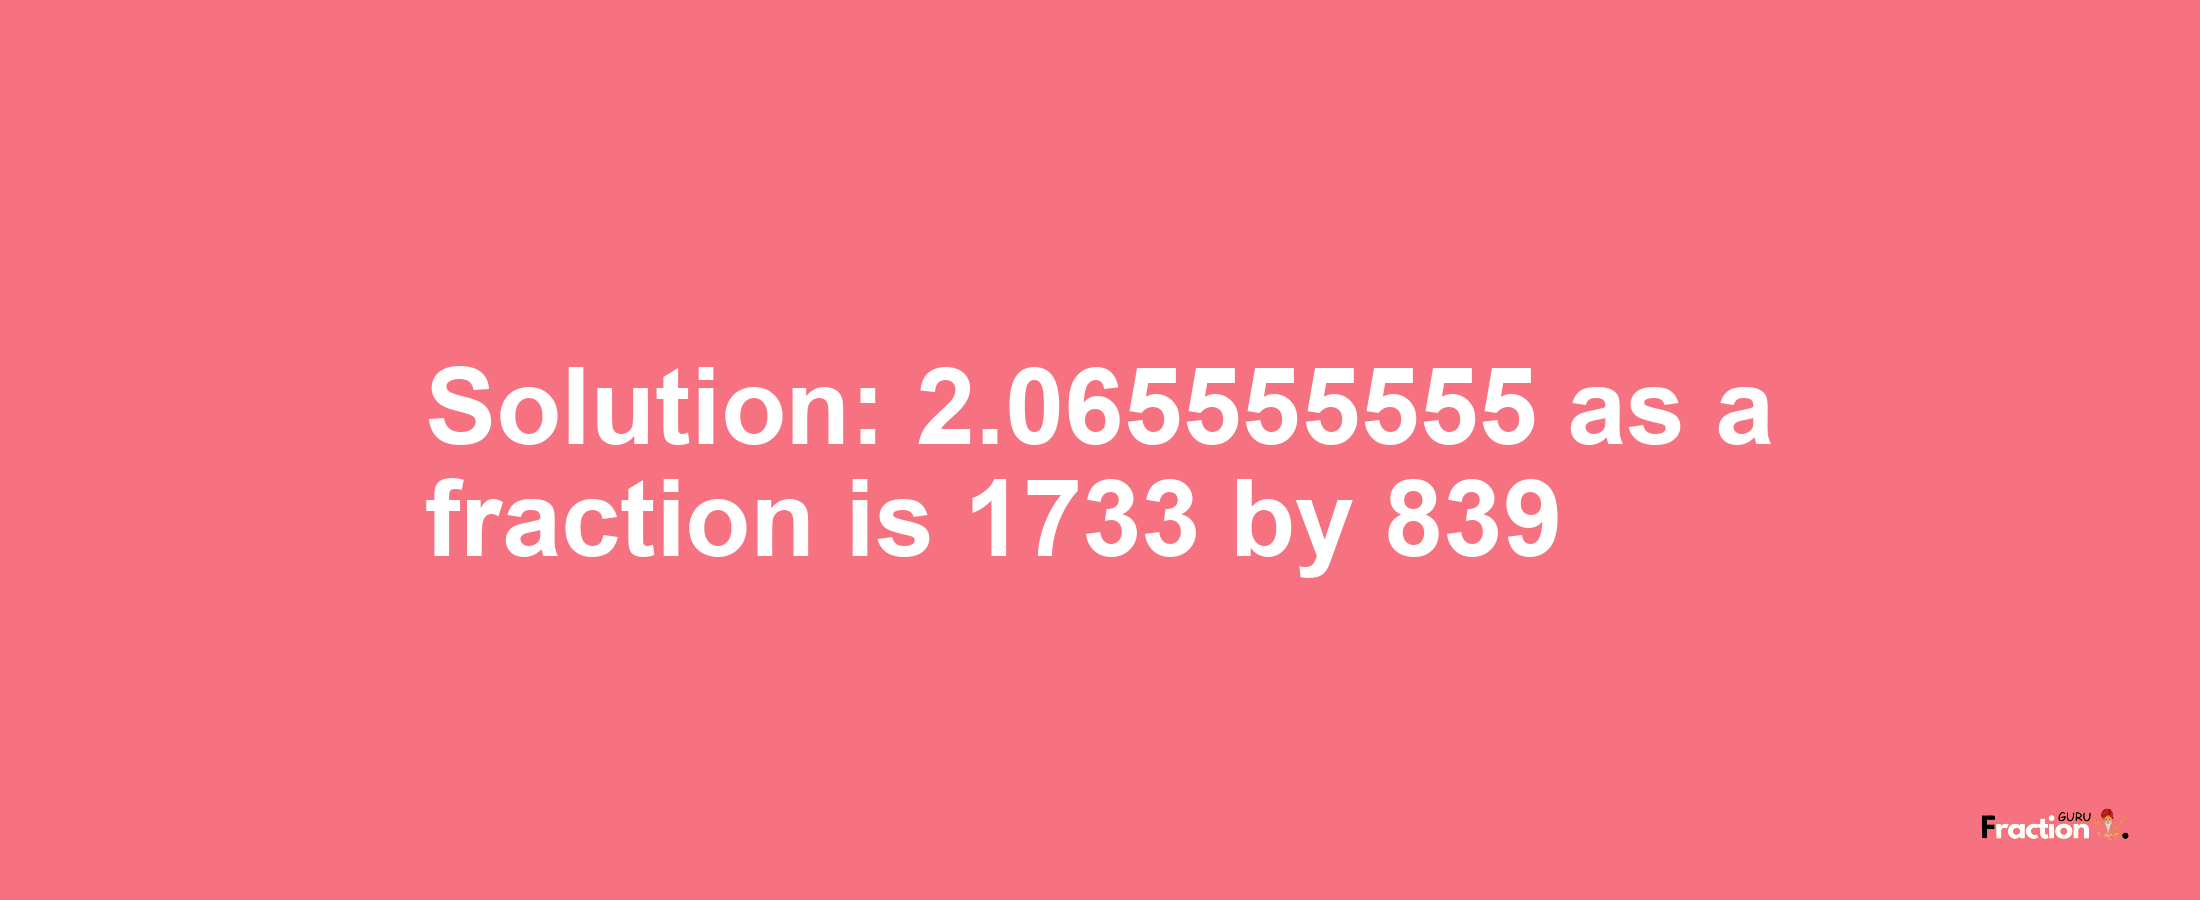 Solution:2.065555555 as a fraction is 1733/839